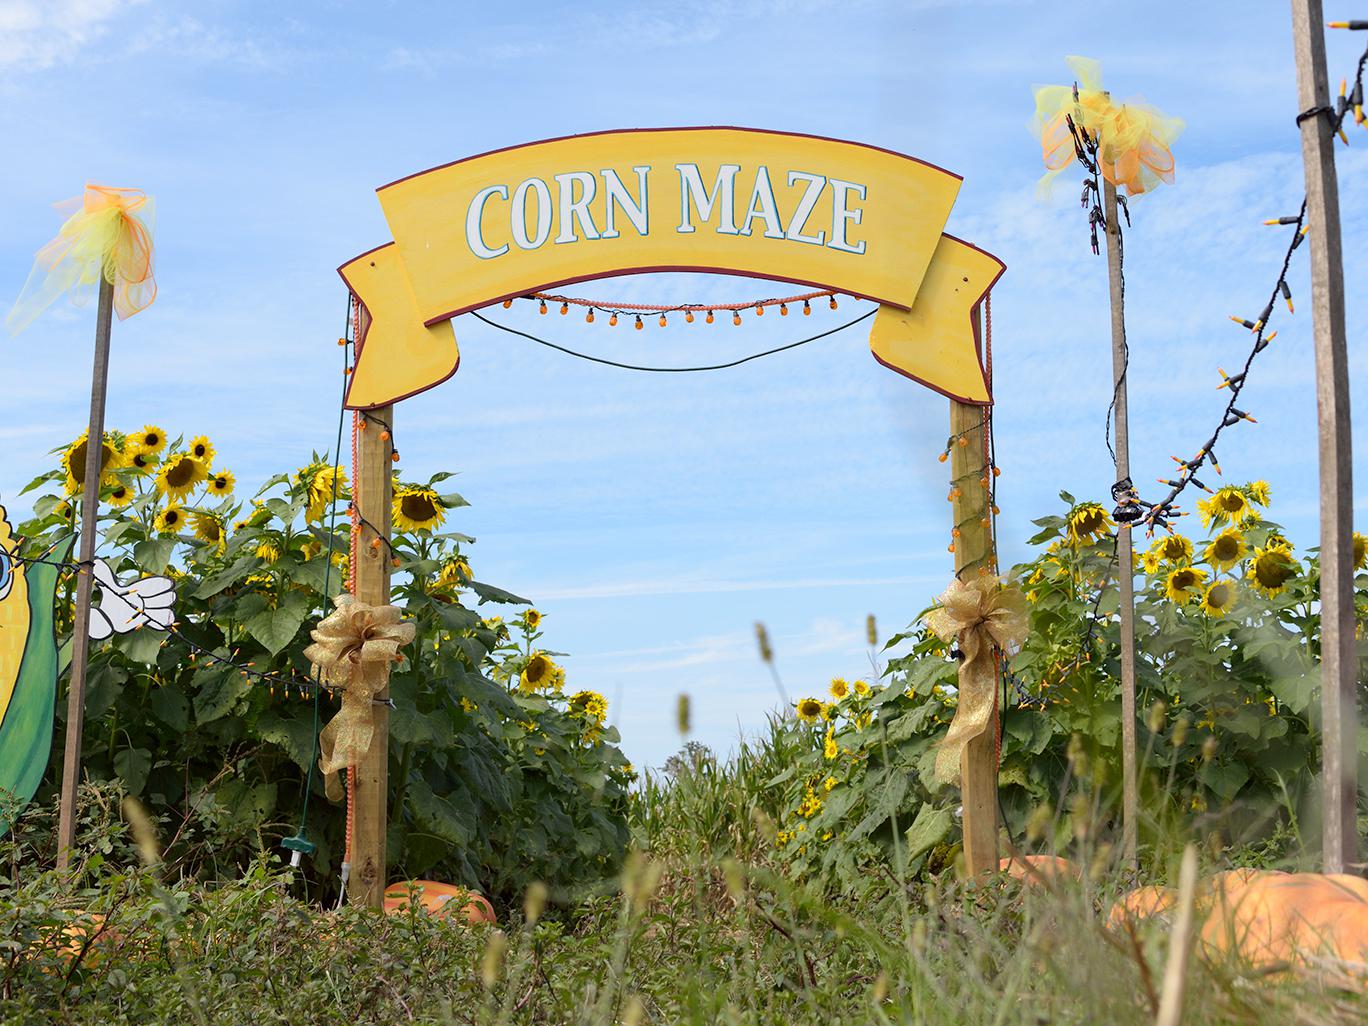 Agritourism offers opportunities for entertainment -- such as this corn maze shown at Mitchell Farms in Collins, Mississippi -- that also educate about agriculture and add to local revenue streams. (File photo by MSU Extension Service/Kevin Hudson)